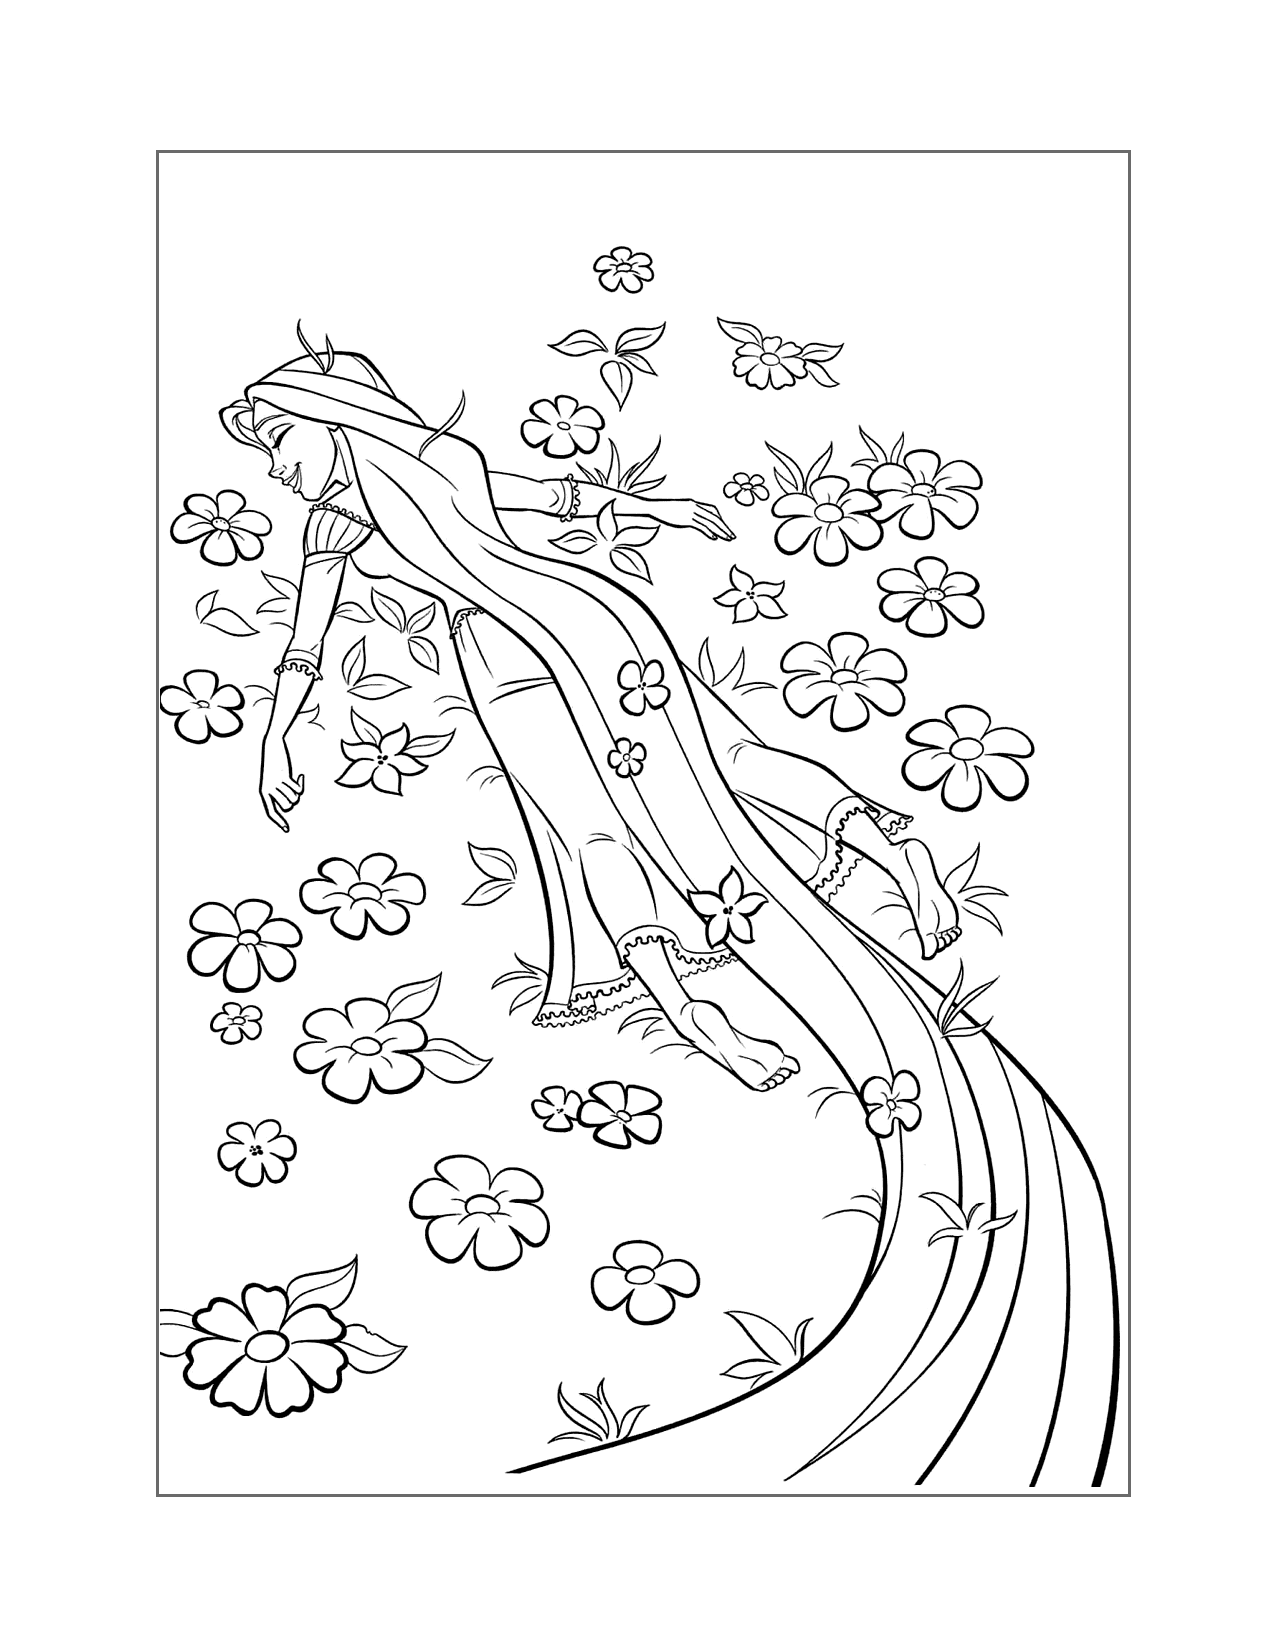 Rapunzel Loves Being Outside Coloring Page